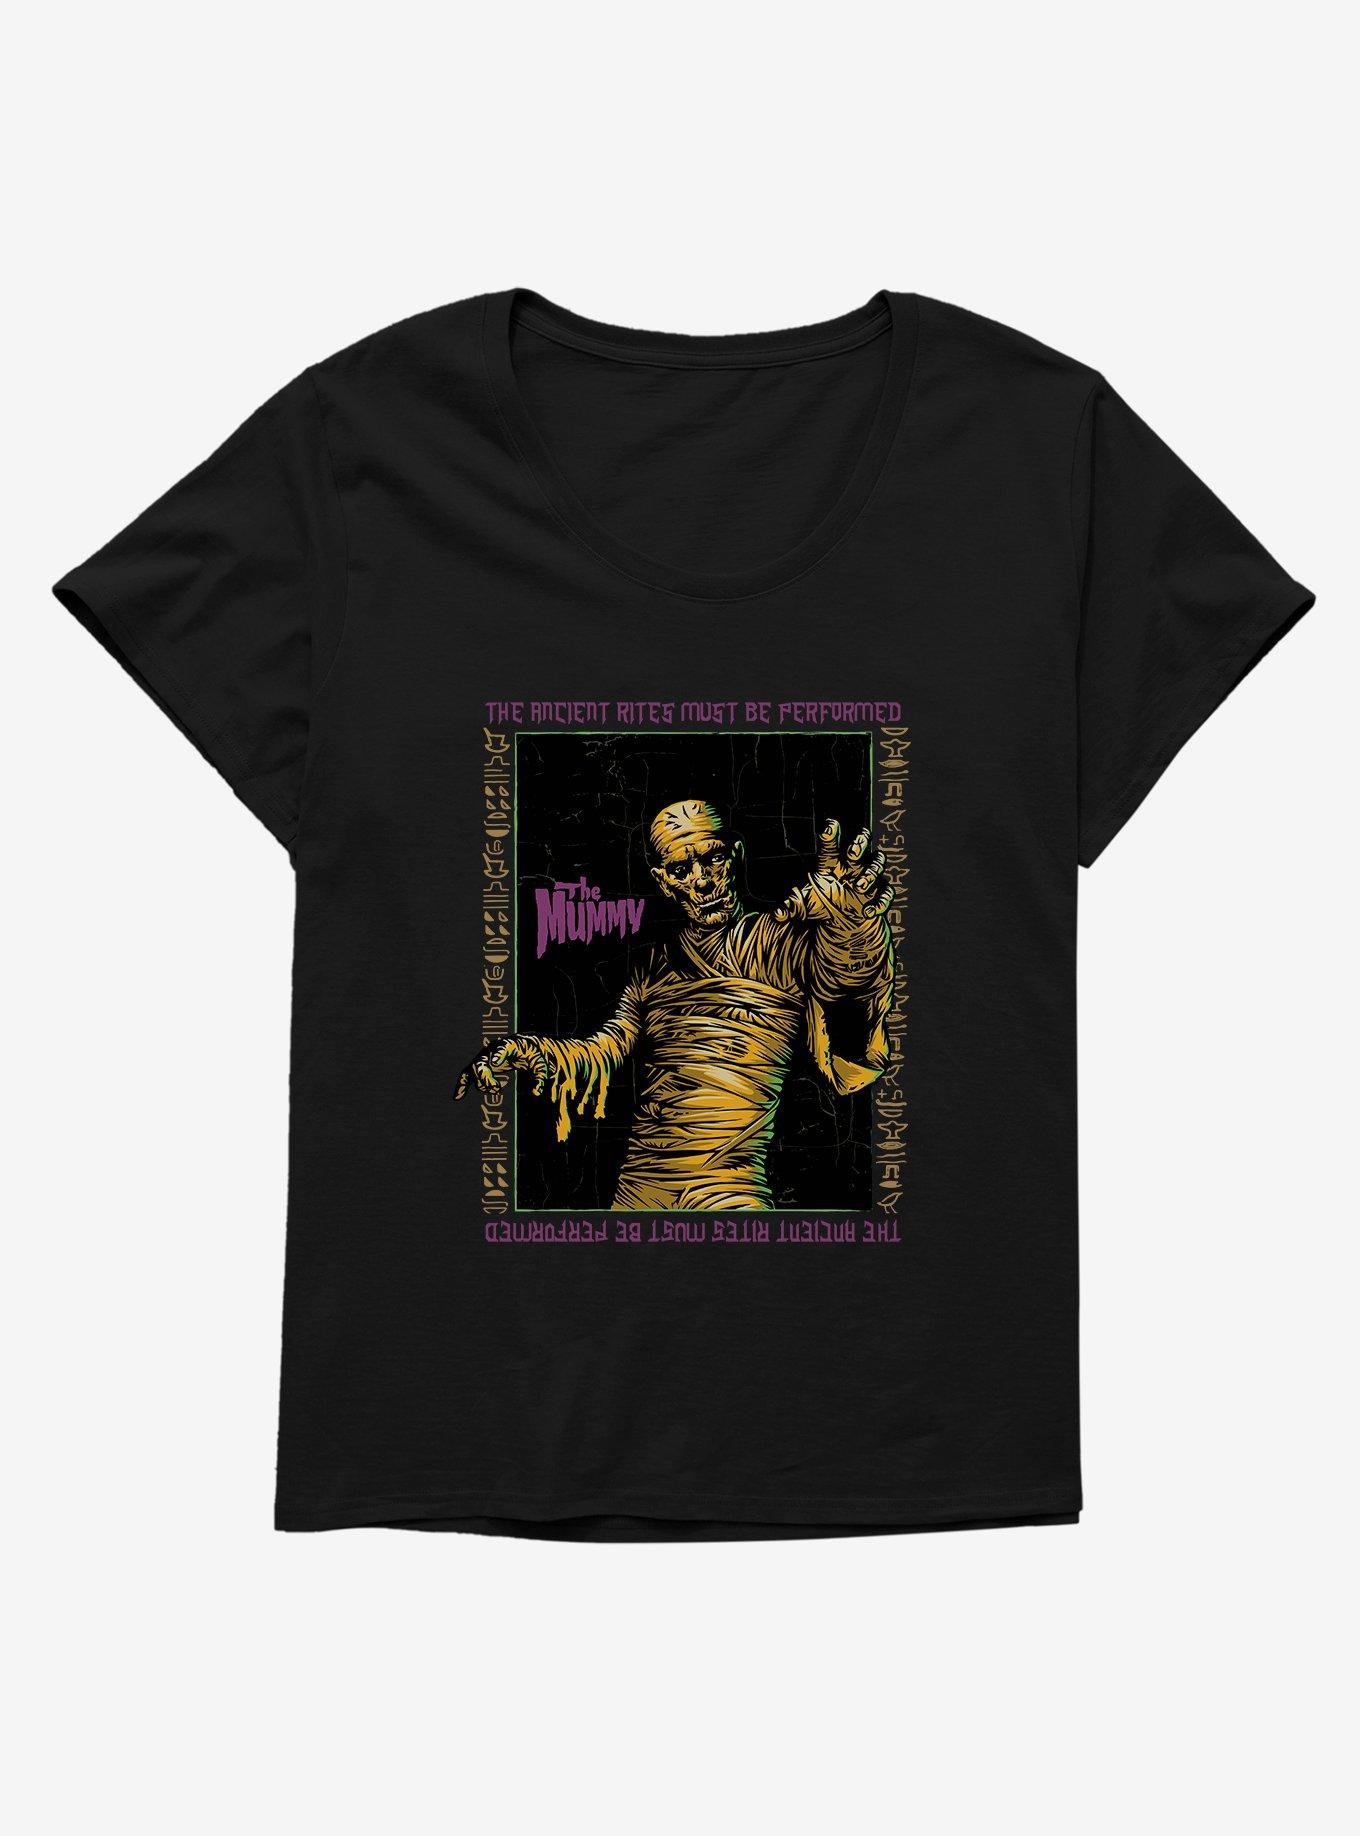 Universal Monsters The Mummy Ancient Rites Must Be Performed Girls T-Shirt Plus Size, BLACK, hi-res